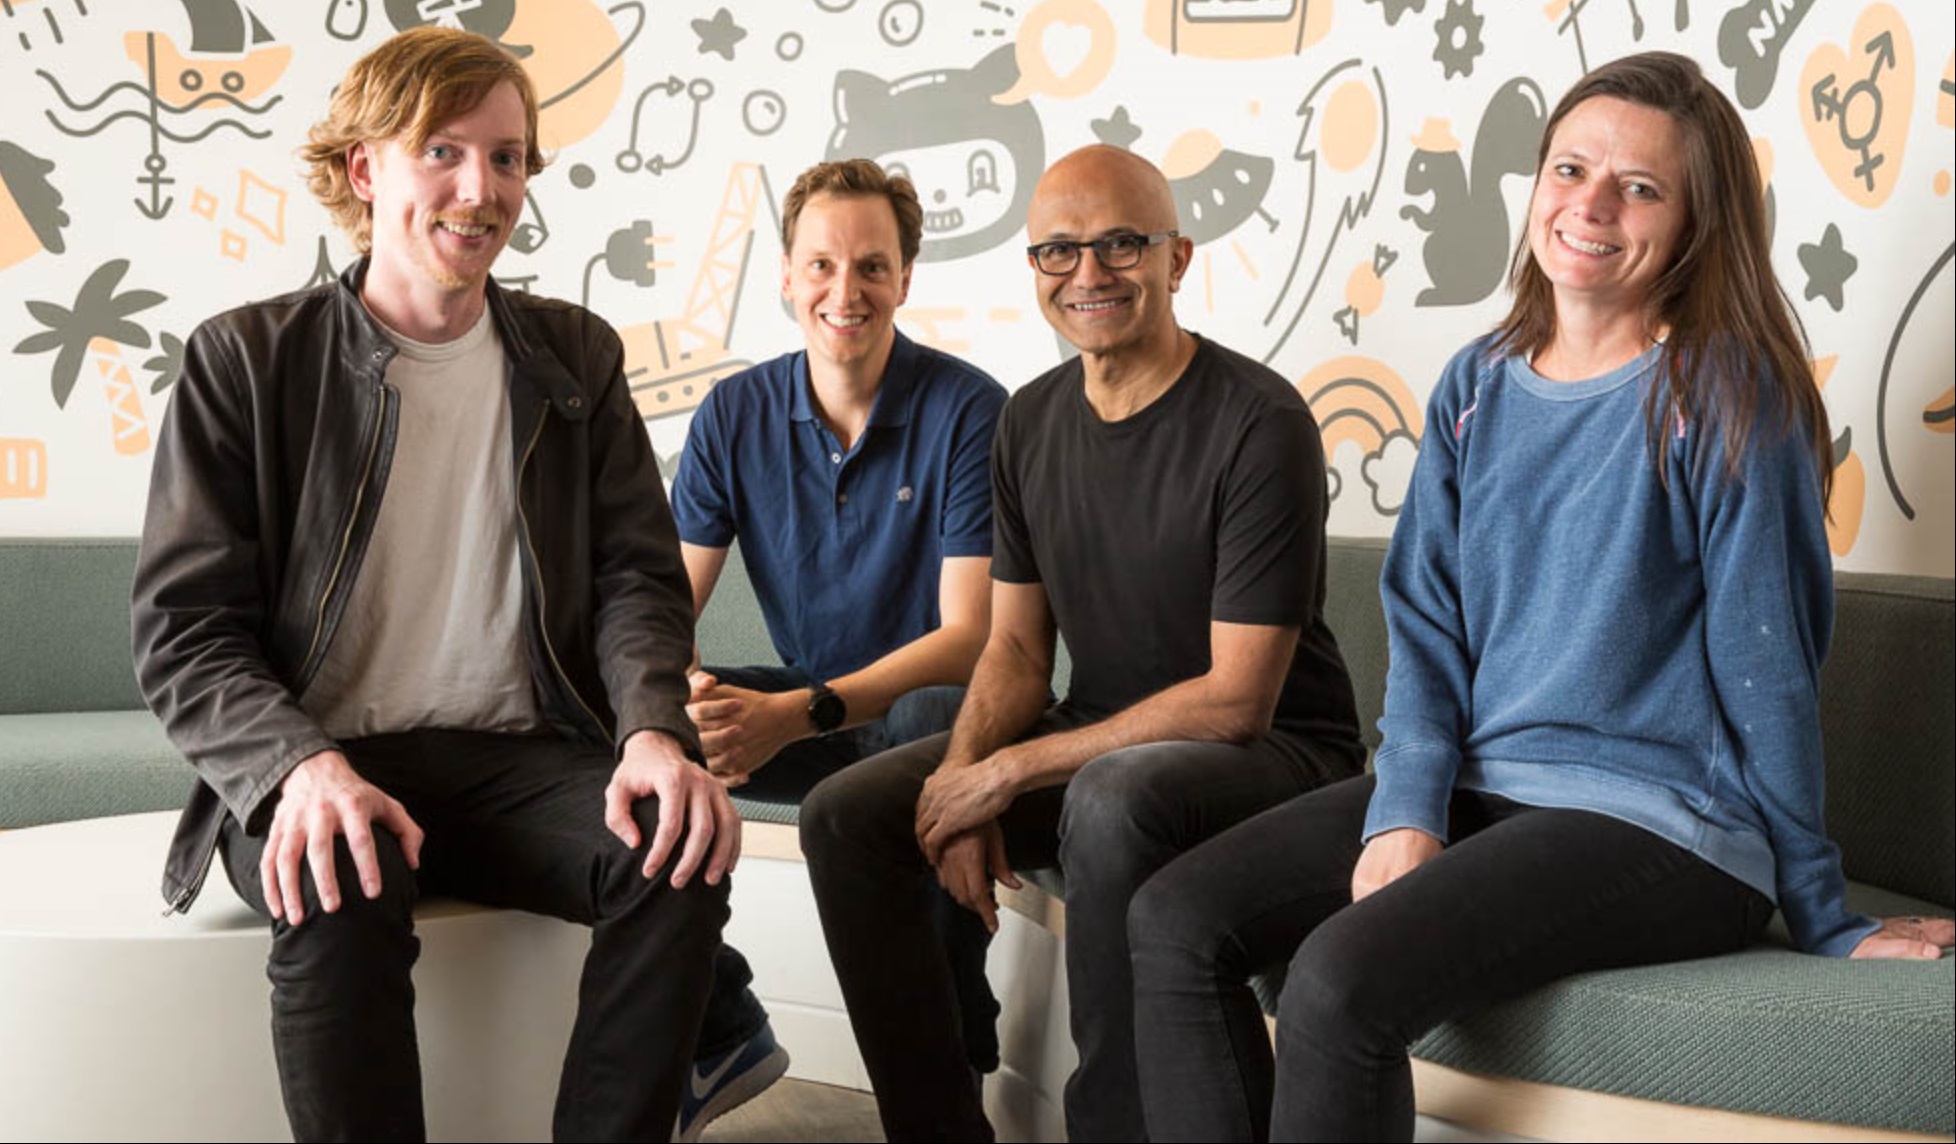 Satya Nadella sitting and posing with three people, including GitHub CEO